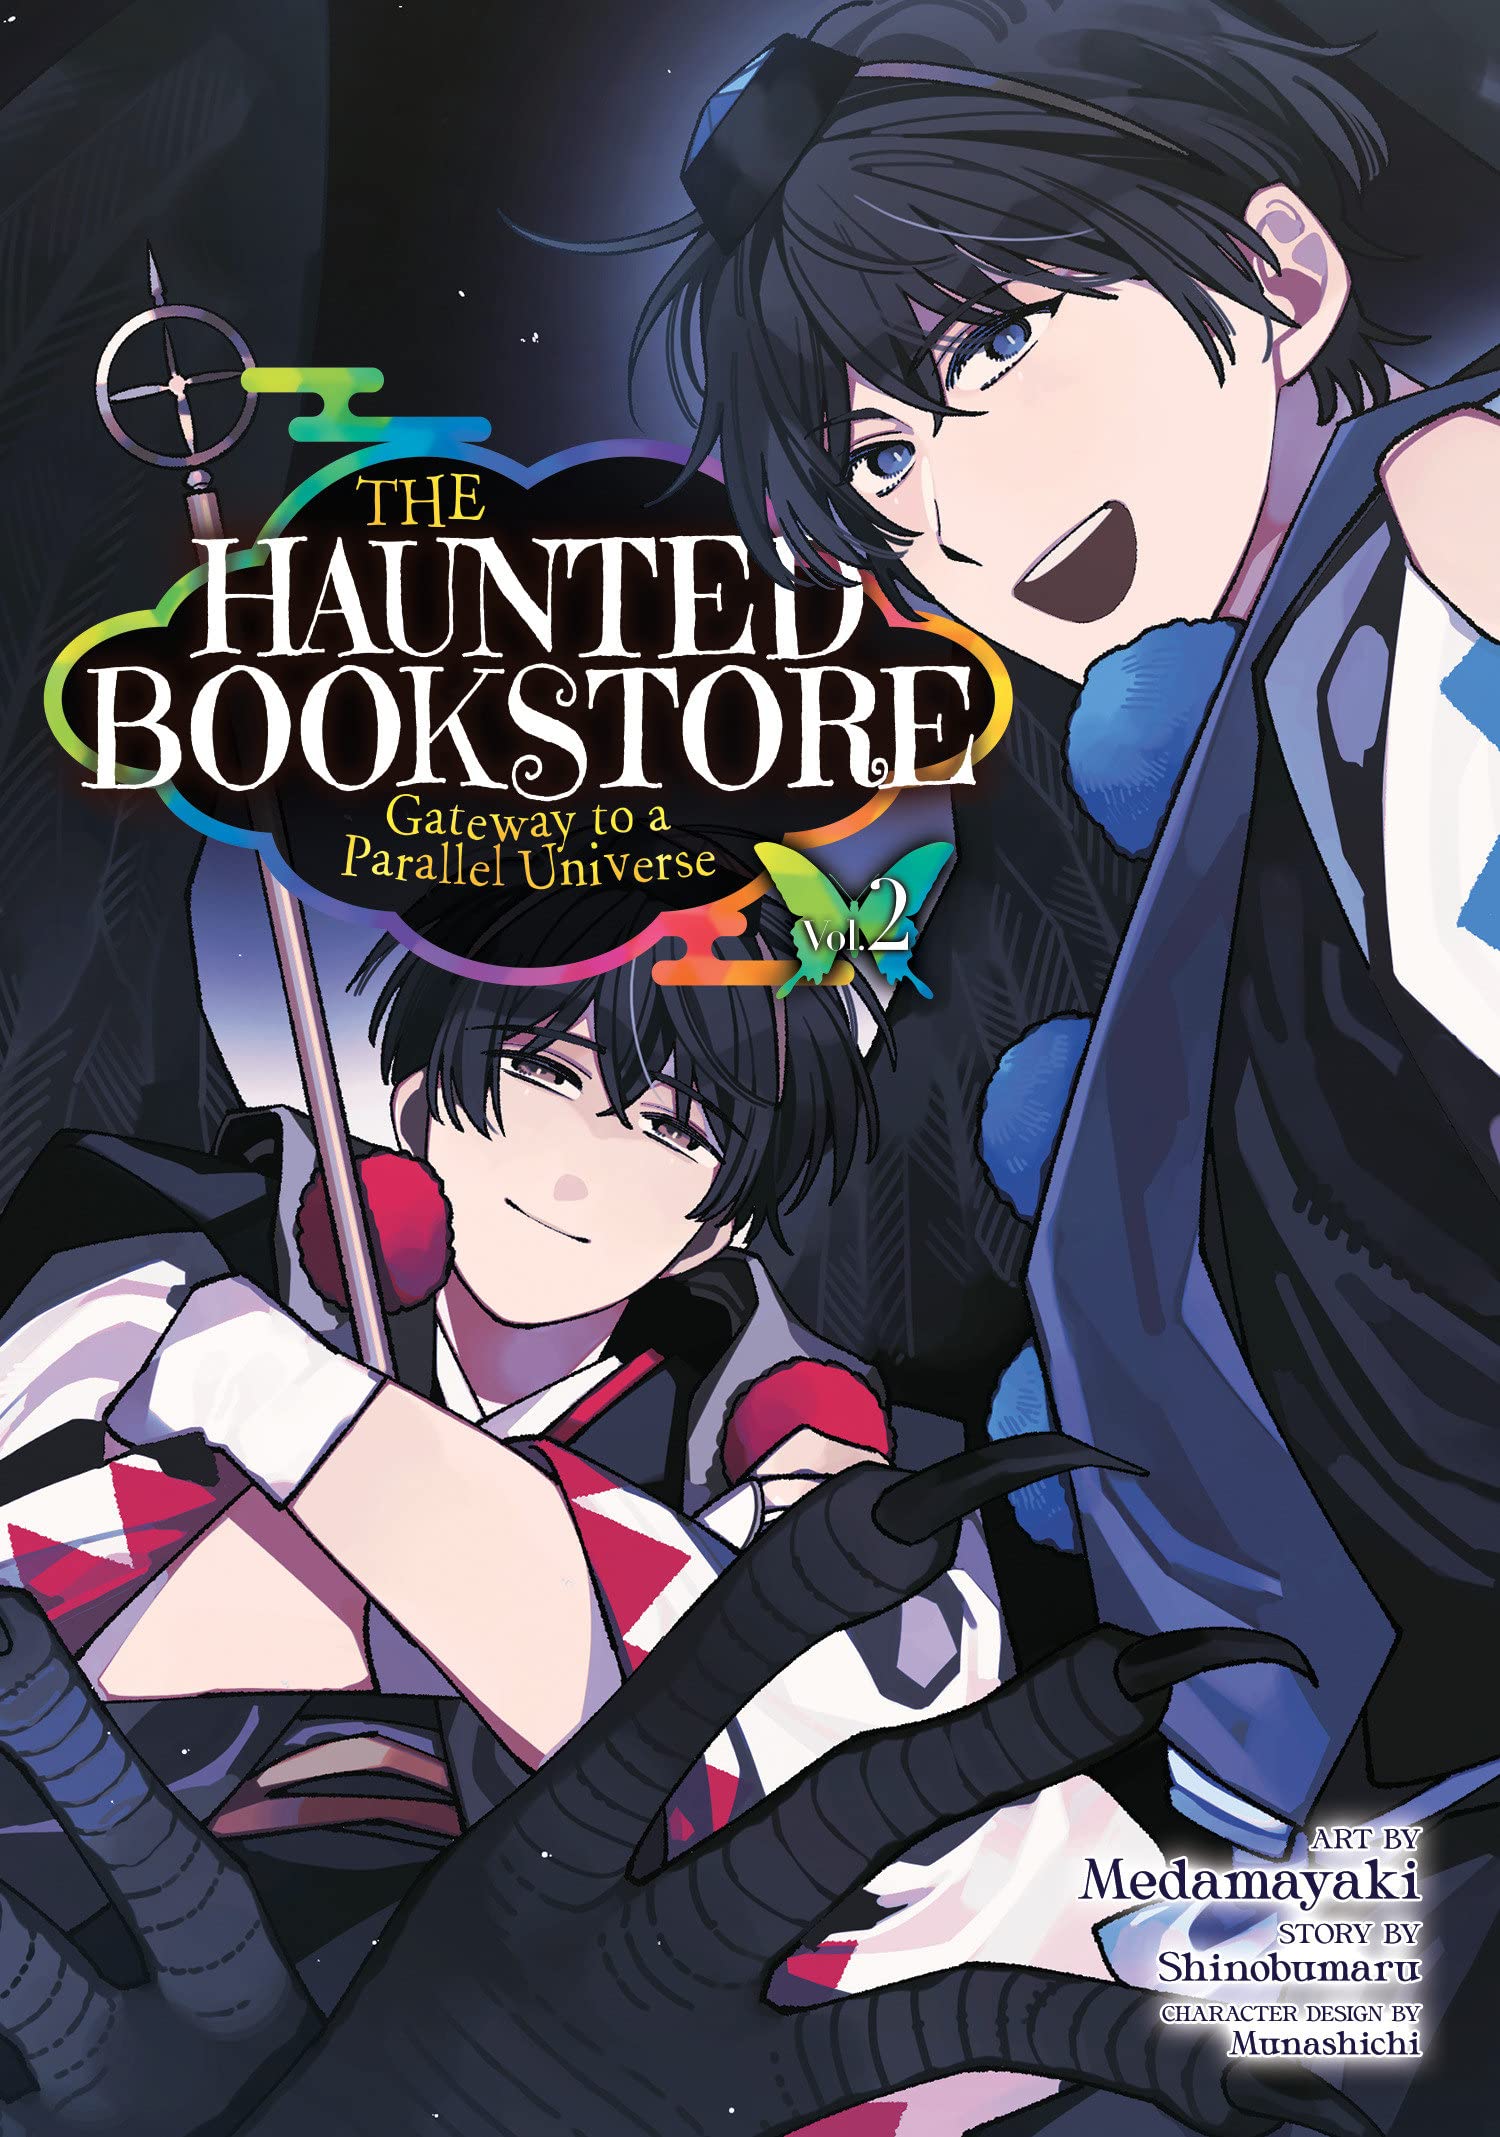 The Haunted Bookstore - Gateway to a Parallel Universe (Manga) Vol. 02